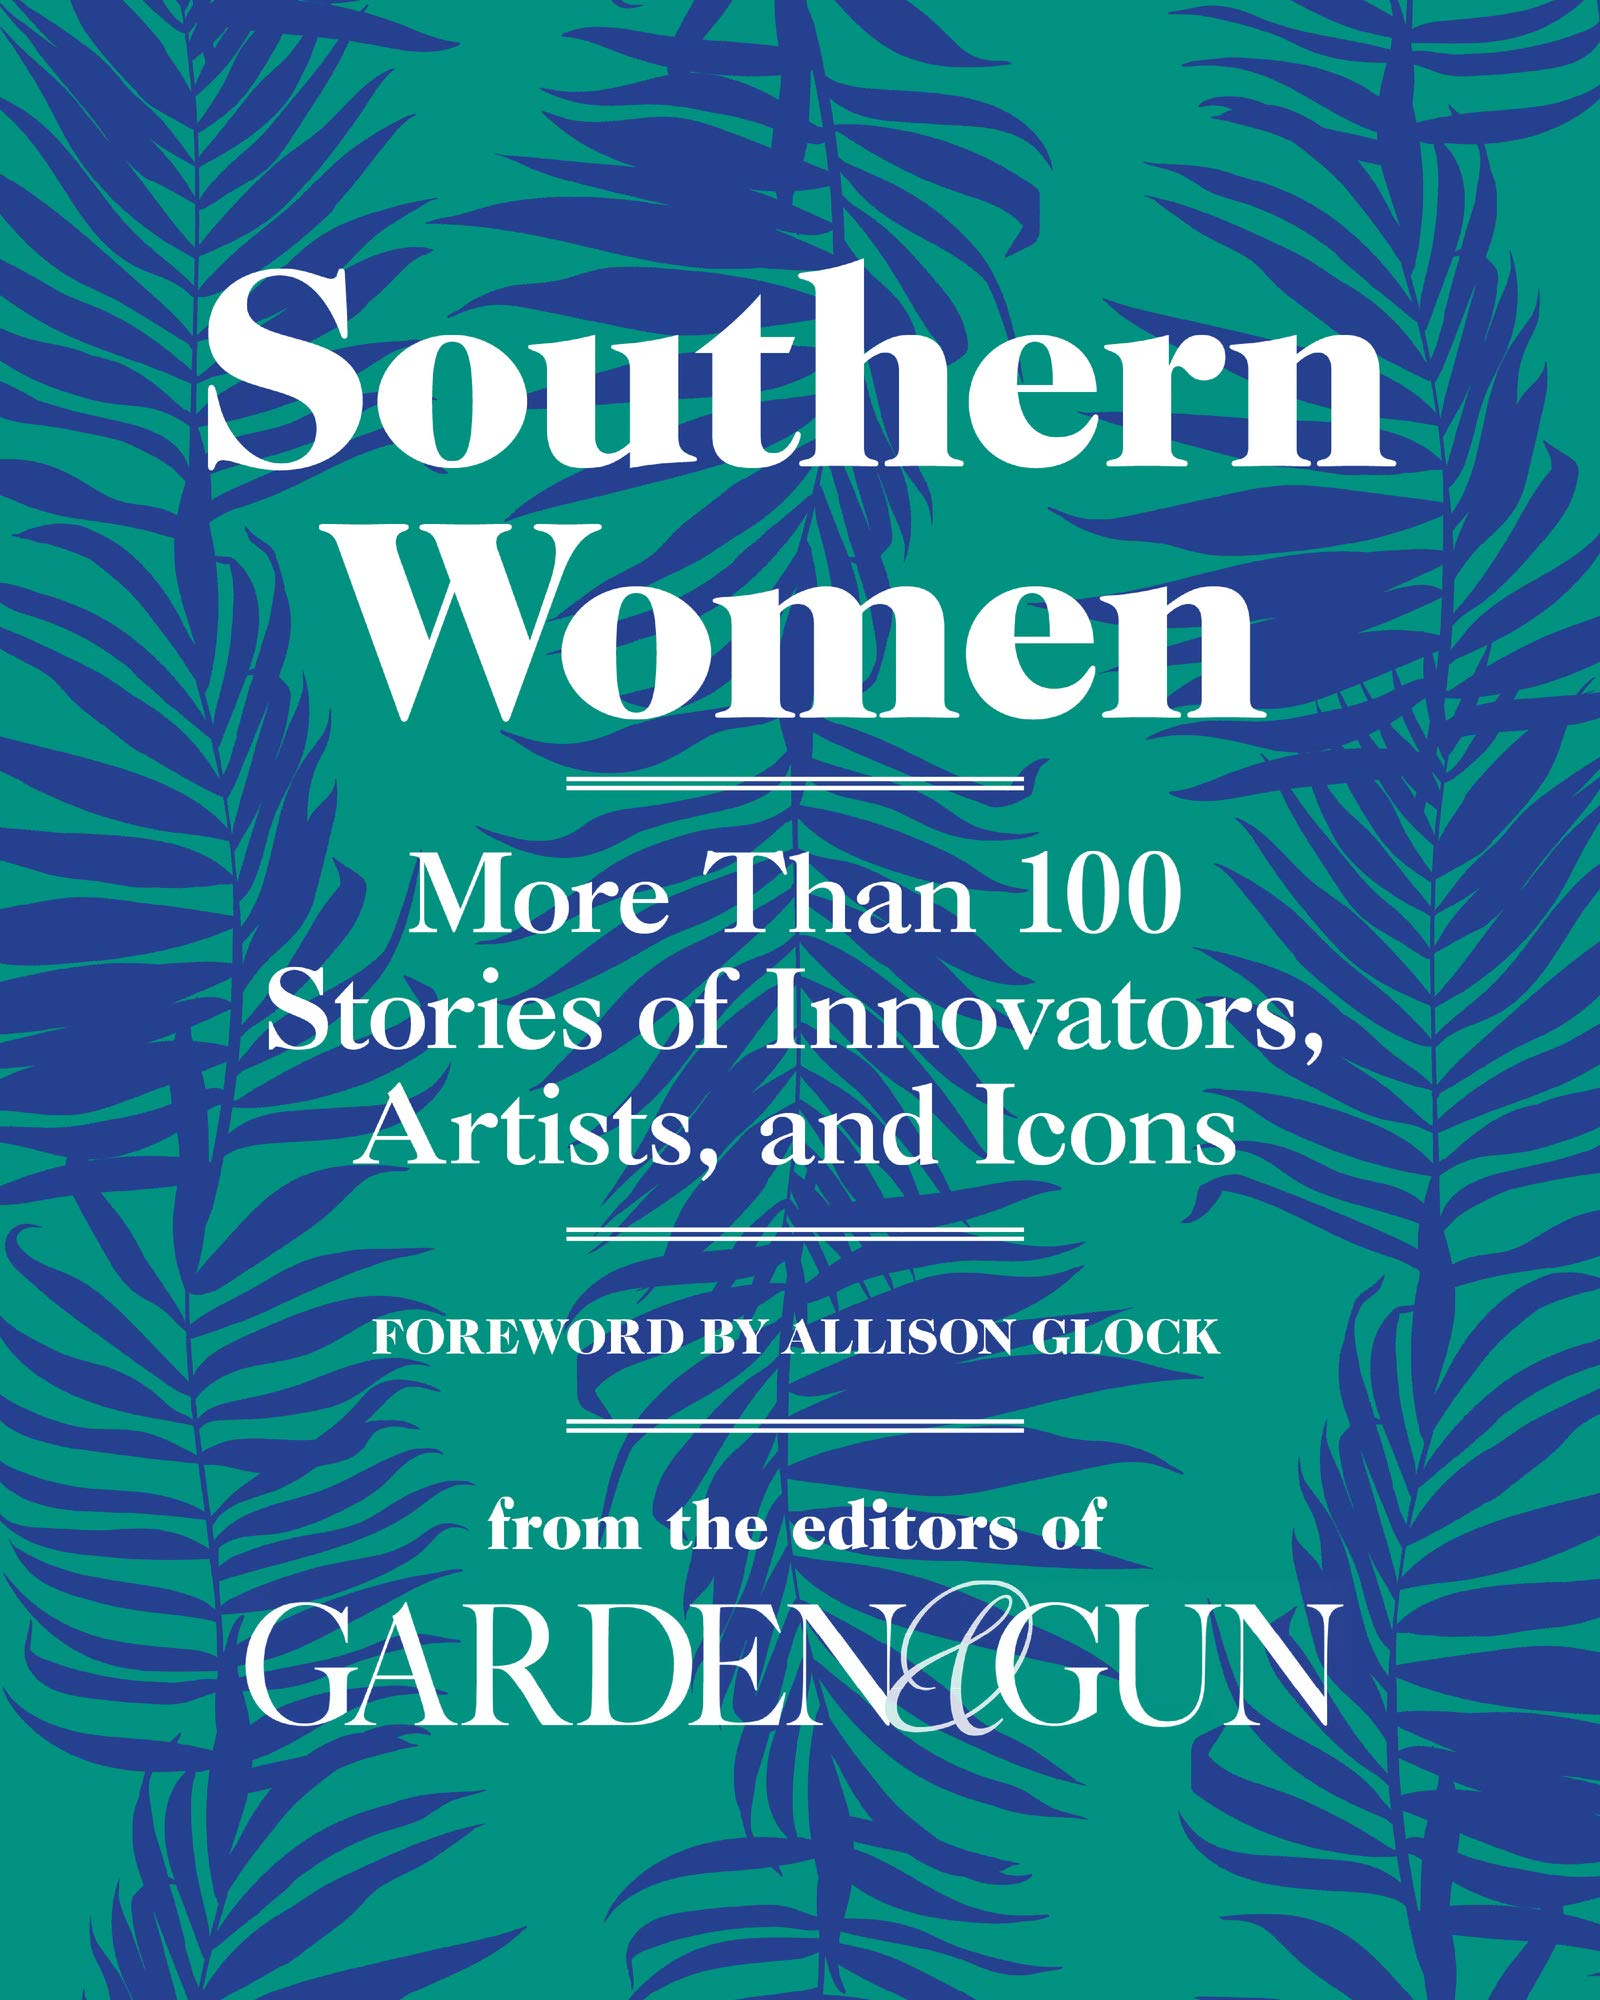 Southern Women: More than 100 Stories of Innovators, Artists, and Icons